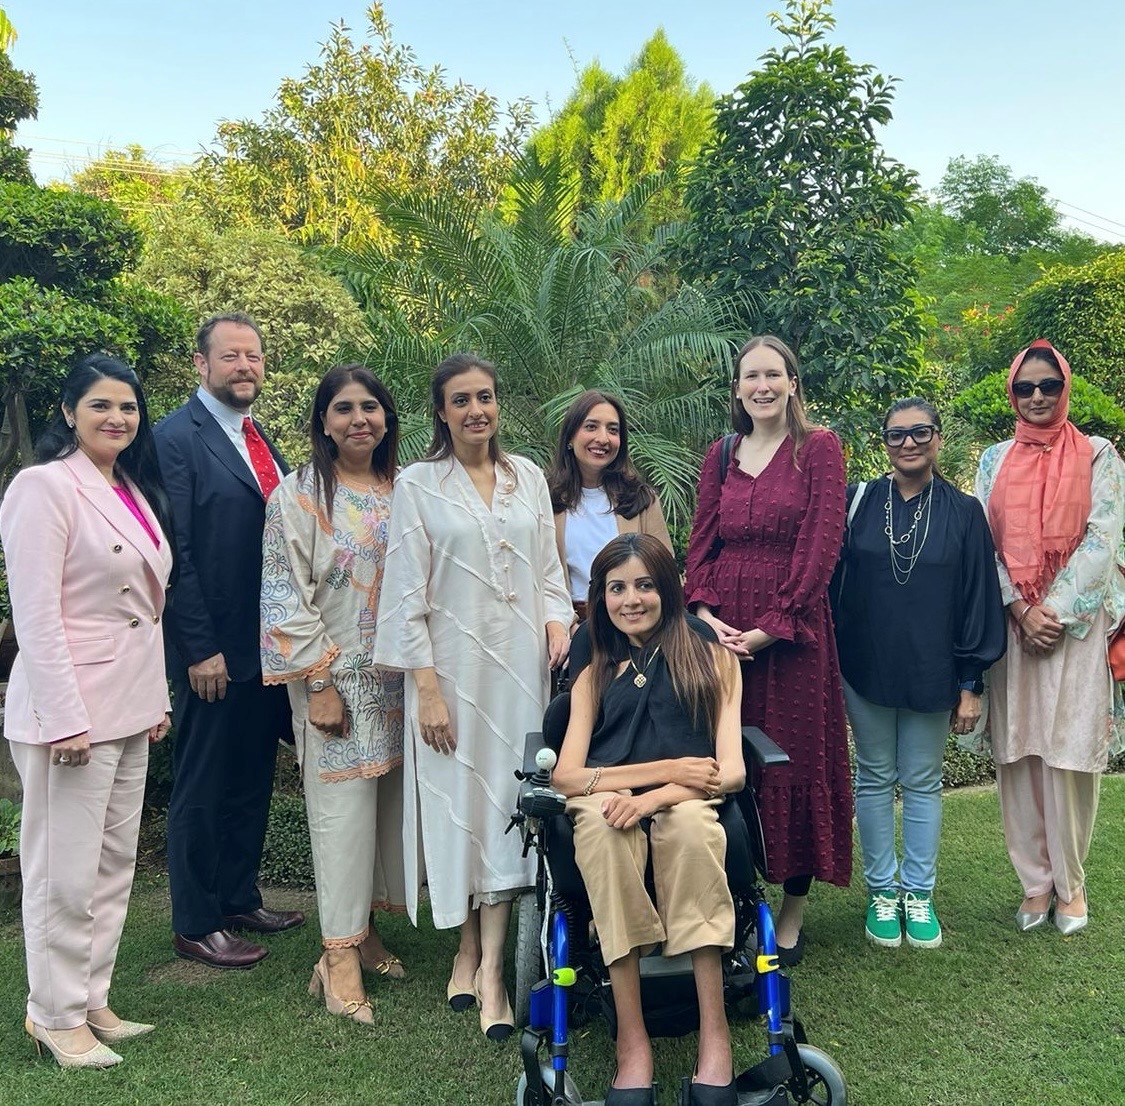 Empowered women power communities & contribute directly to sustainable, inclusive economic growth.  They set an important example for women & girls across Pakistan. CG Hawkins connected with dynamic entrepreneurs and leaders to hear about their innovative work.